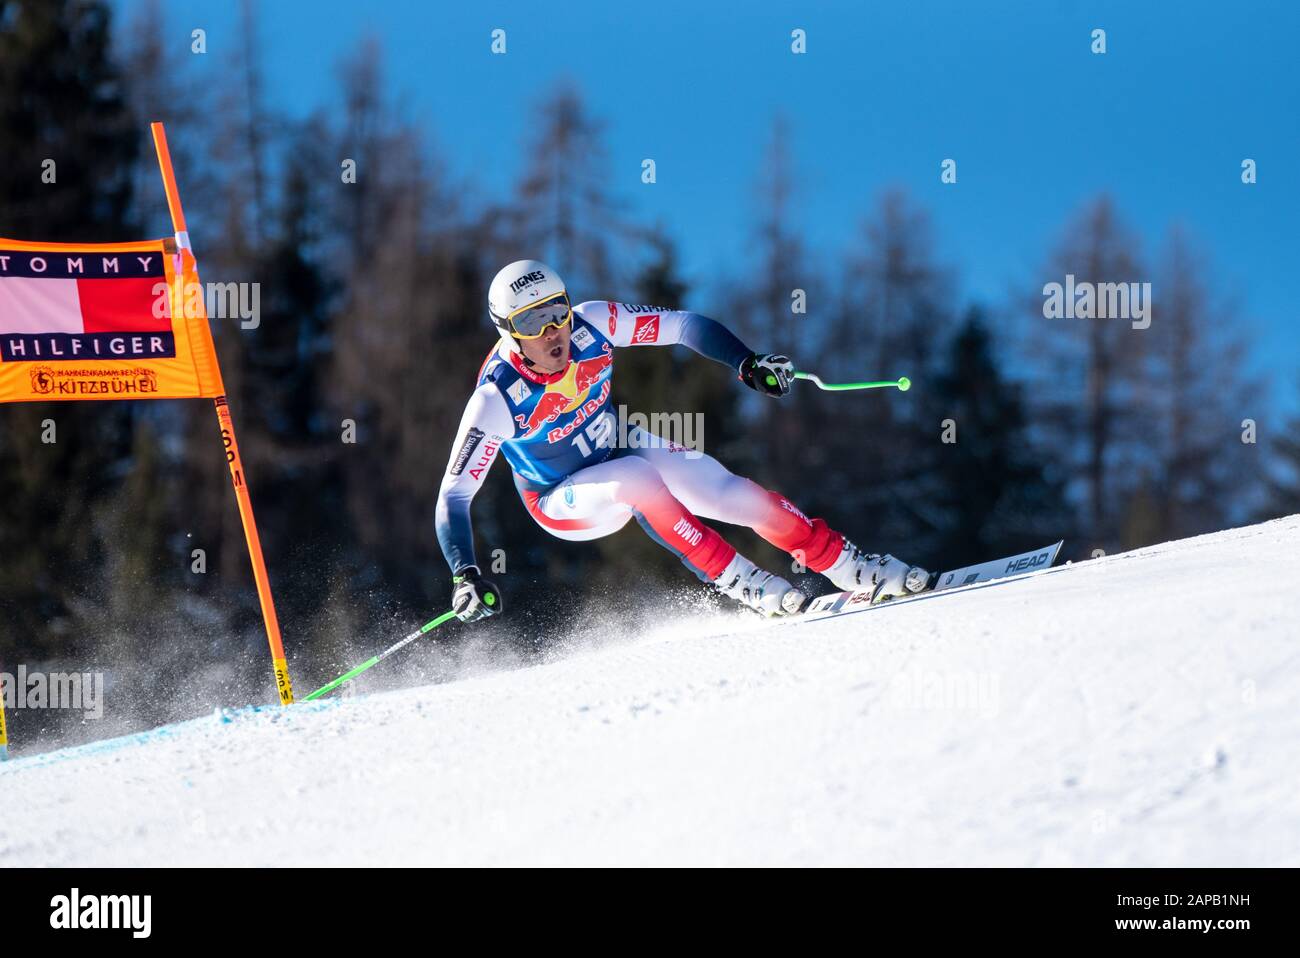 Johan Clarey of France at the Ski Alpin: 80. Hahnenkamm Race 2020 - Audi FIS Alpine Ski World Cup - Men's Downhill Training at the Streif on January 22, 2020 in Kitzbuehel, AUSTRIA. (Photo by Horst Ettensberger/ESPA-Images) Stock Photo